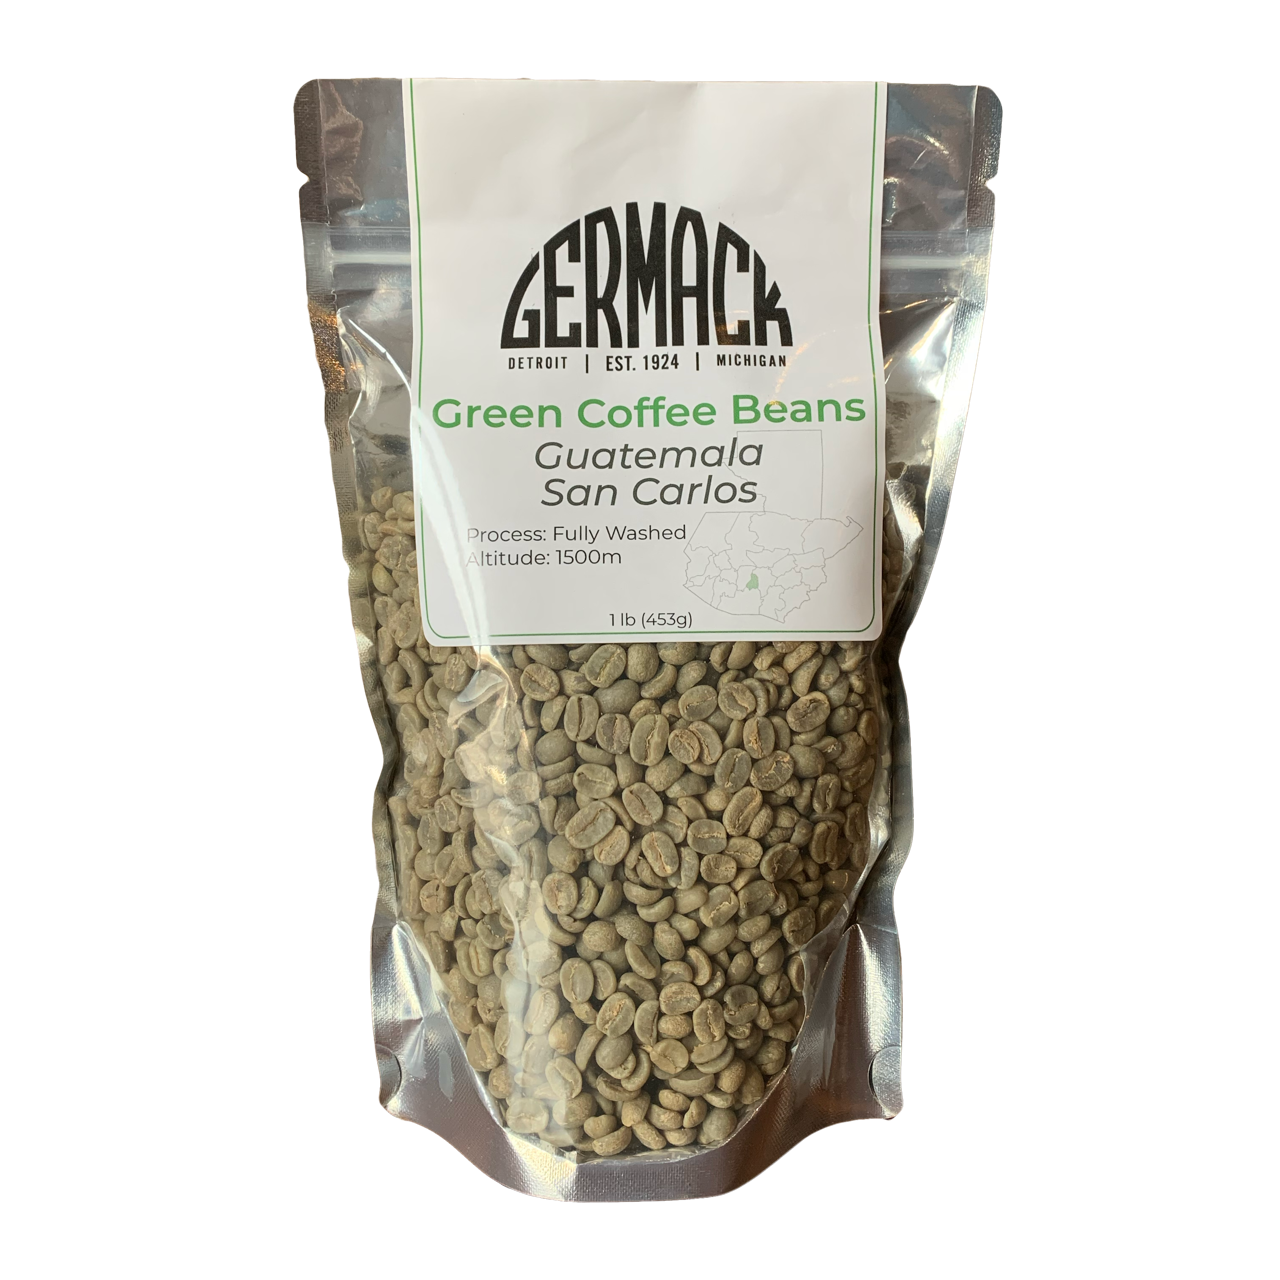 Picture Germack Green Coffee Beans (1 lb) - Guatemala San Carlos